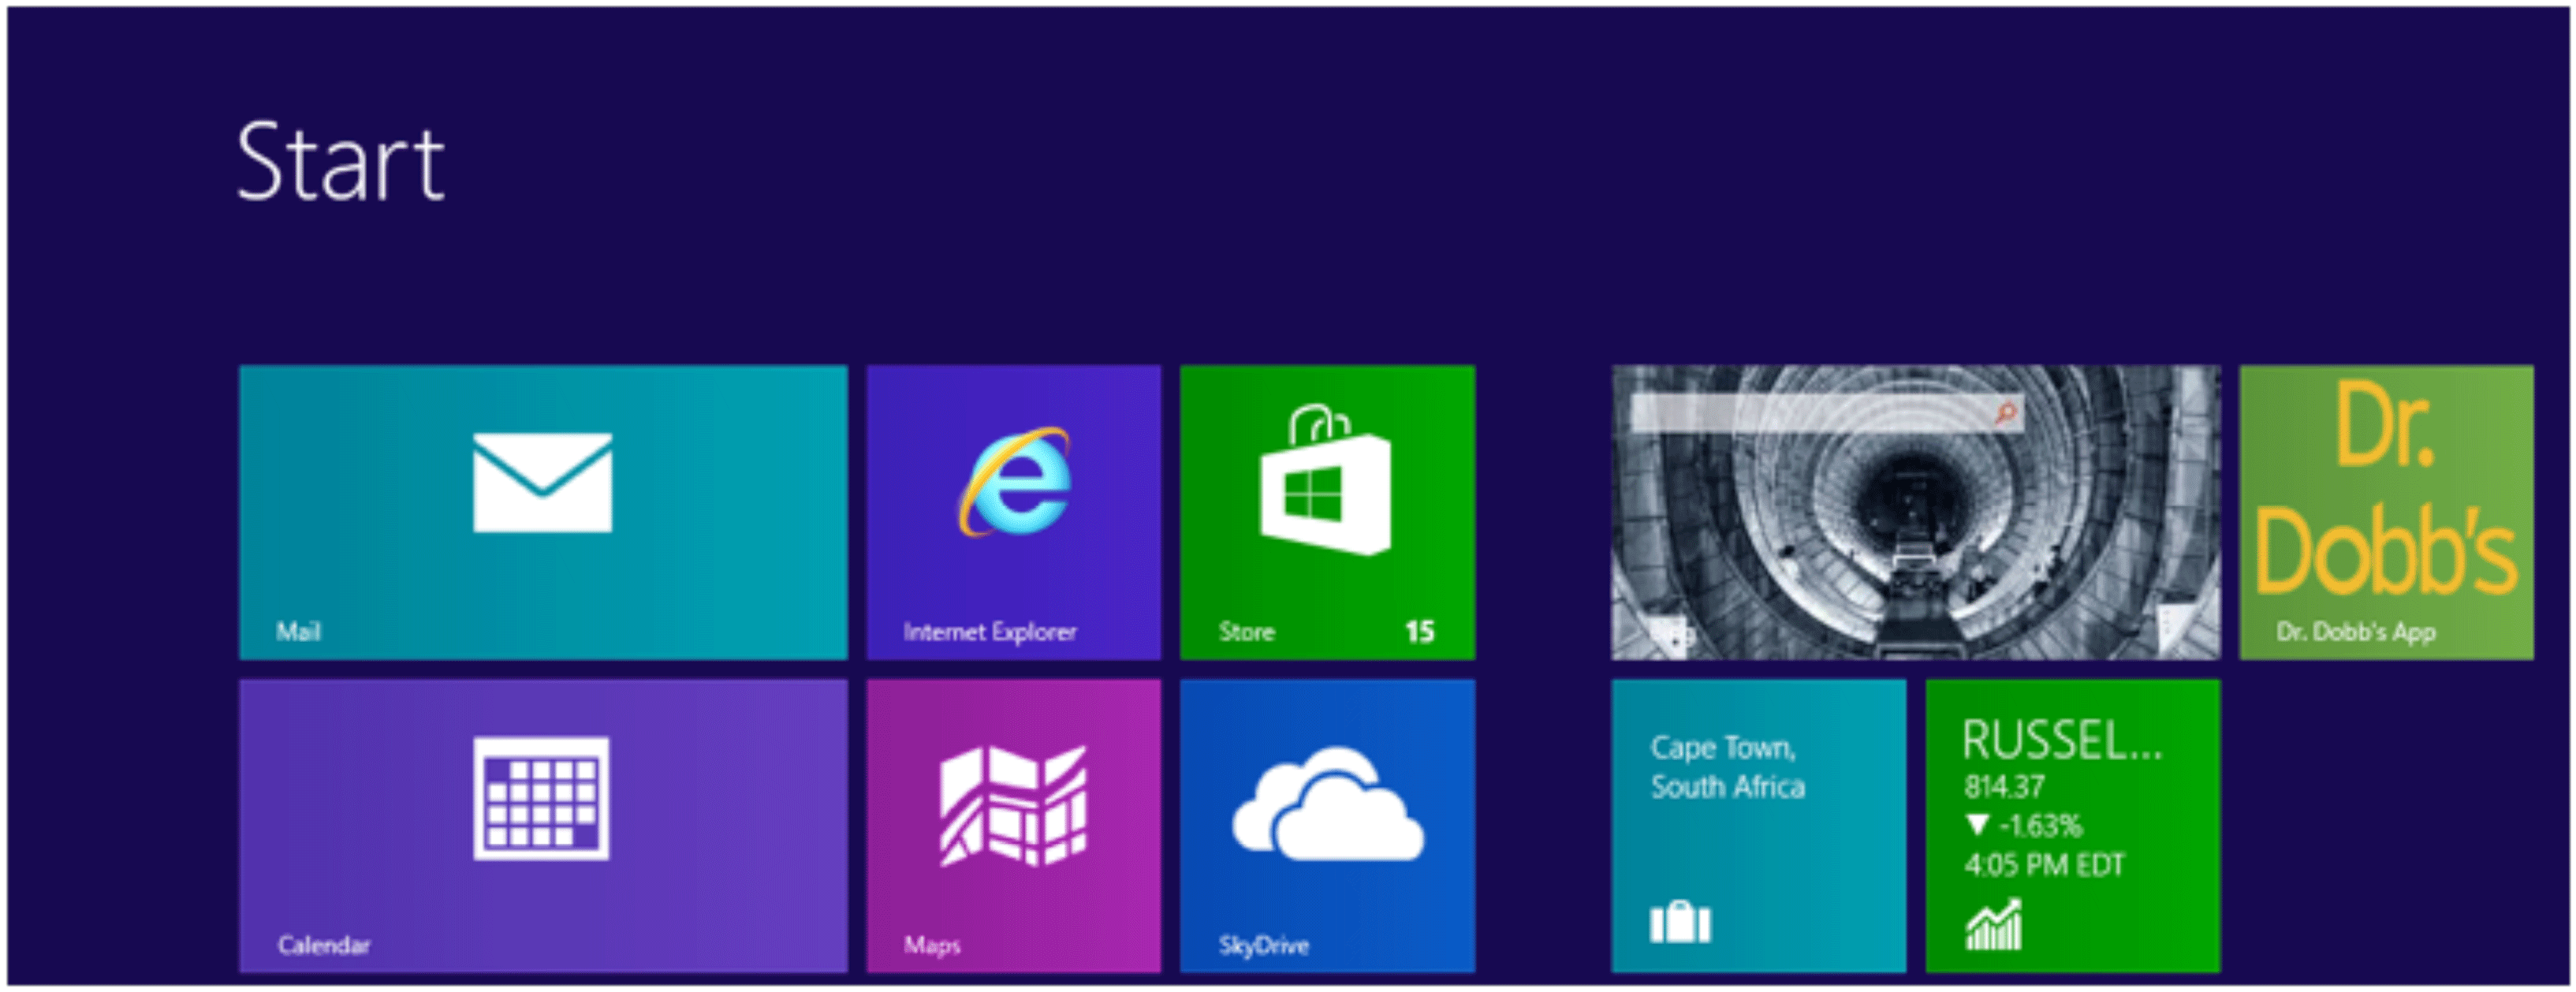 Windows Apps Logo - Customizing the Appearance of Windows 8 Apps | Dr Dobb's